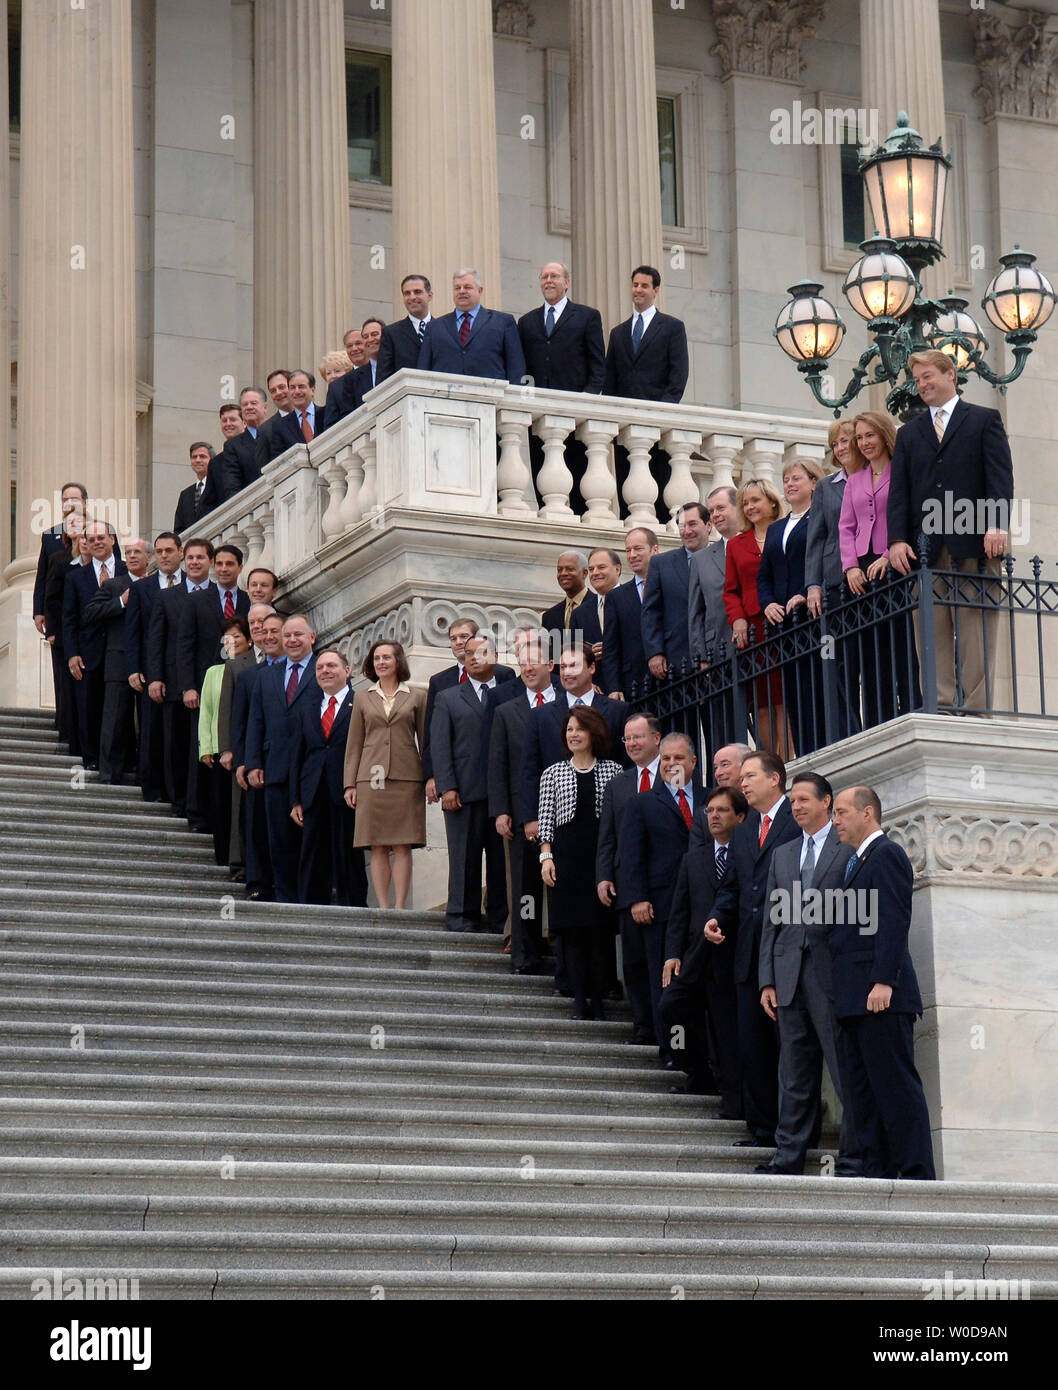 The freshman class of the 110th Congress pose for a group photo on the East Front Steps of the House side of the U.S. Capitol Building, in Washington on November 14, 2006.  The Democrats take control of both the House and Senate in January. (UPI Photo/Kevin Dietsch) Stock Photo